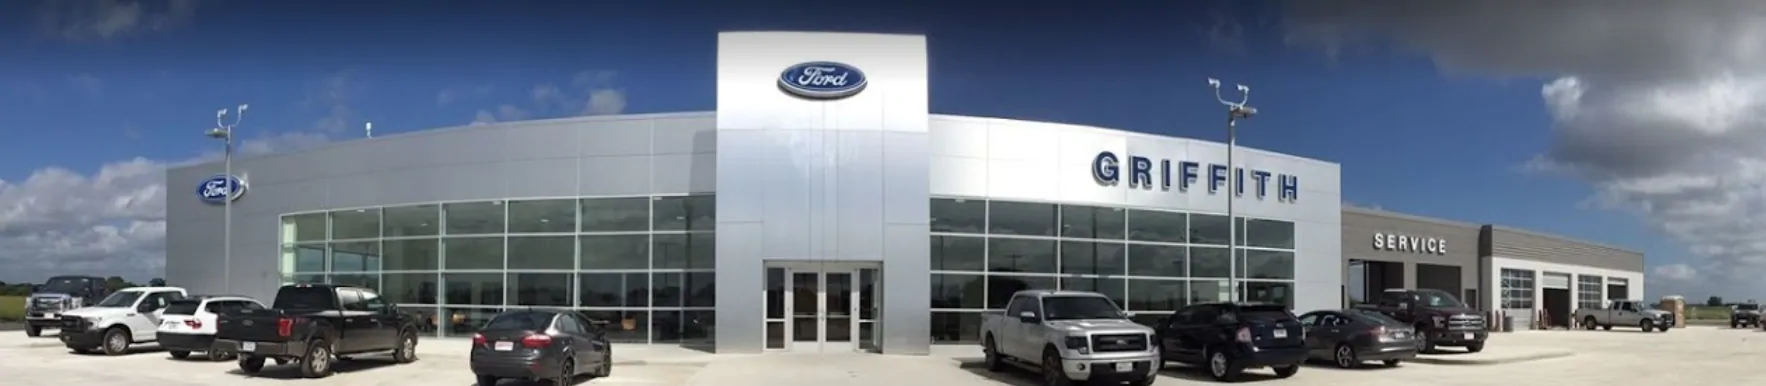 Service at Griffith Ford Seguin in Seguin TX